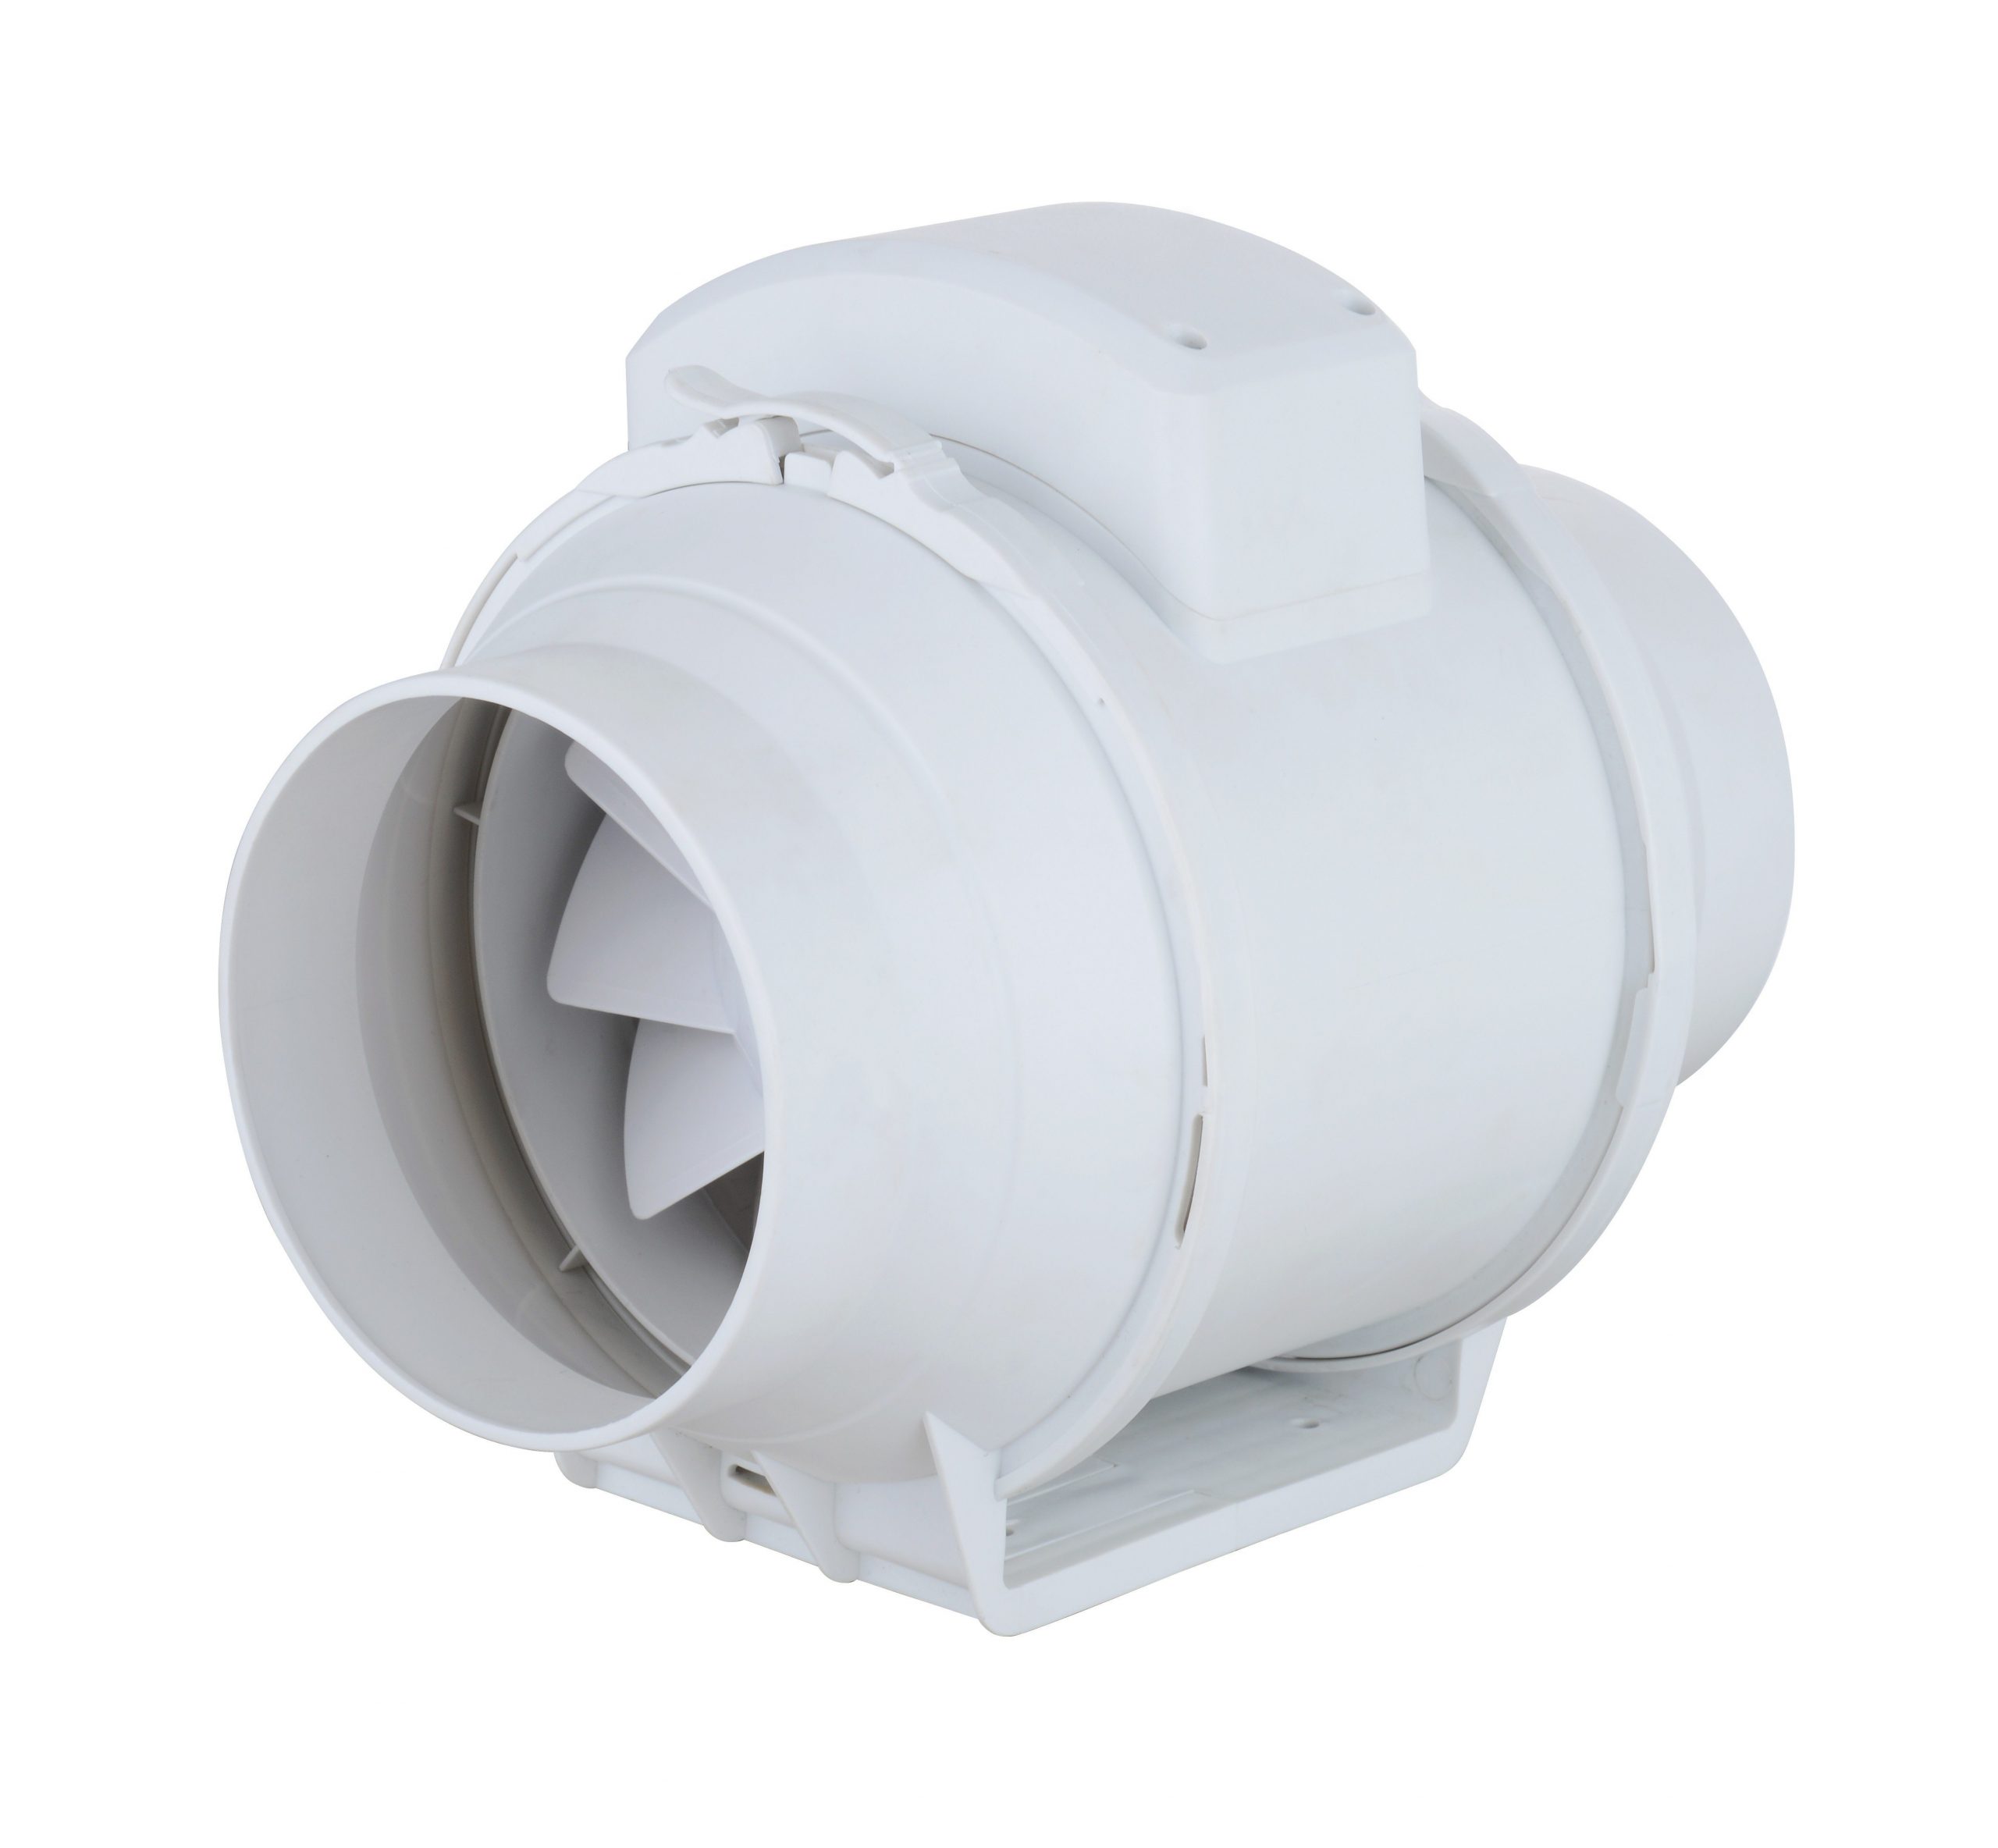 Hot Item Noiseless Bathroom Office Plastic Inline Duct Exhaust Fan throughout dimensions 4696 X 4344